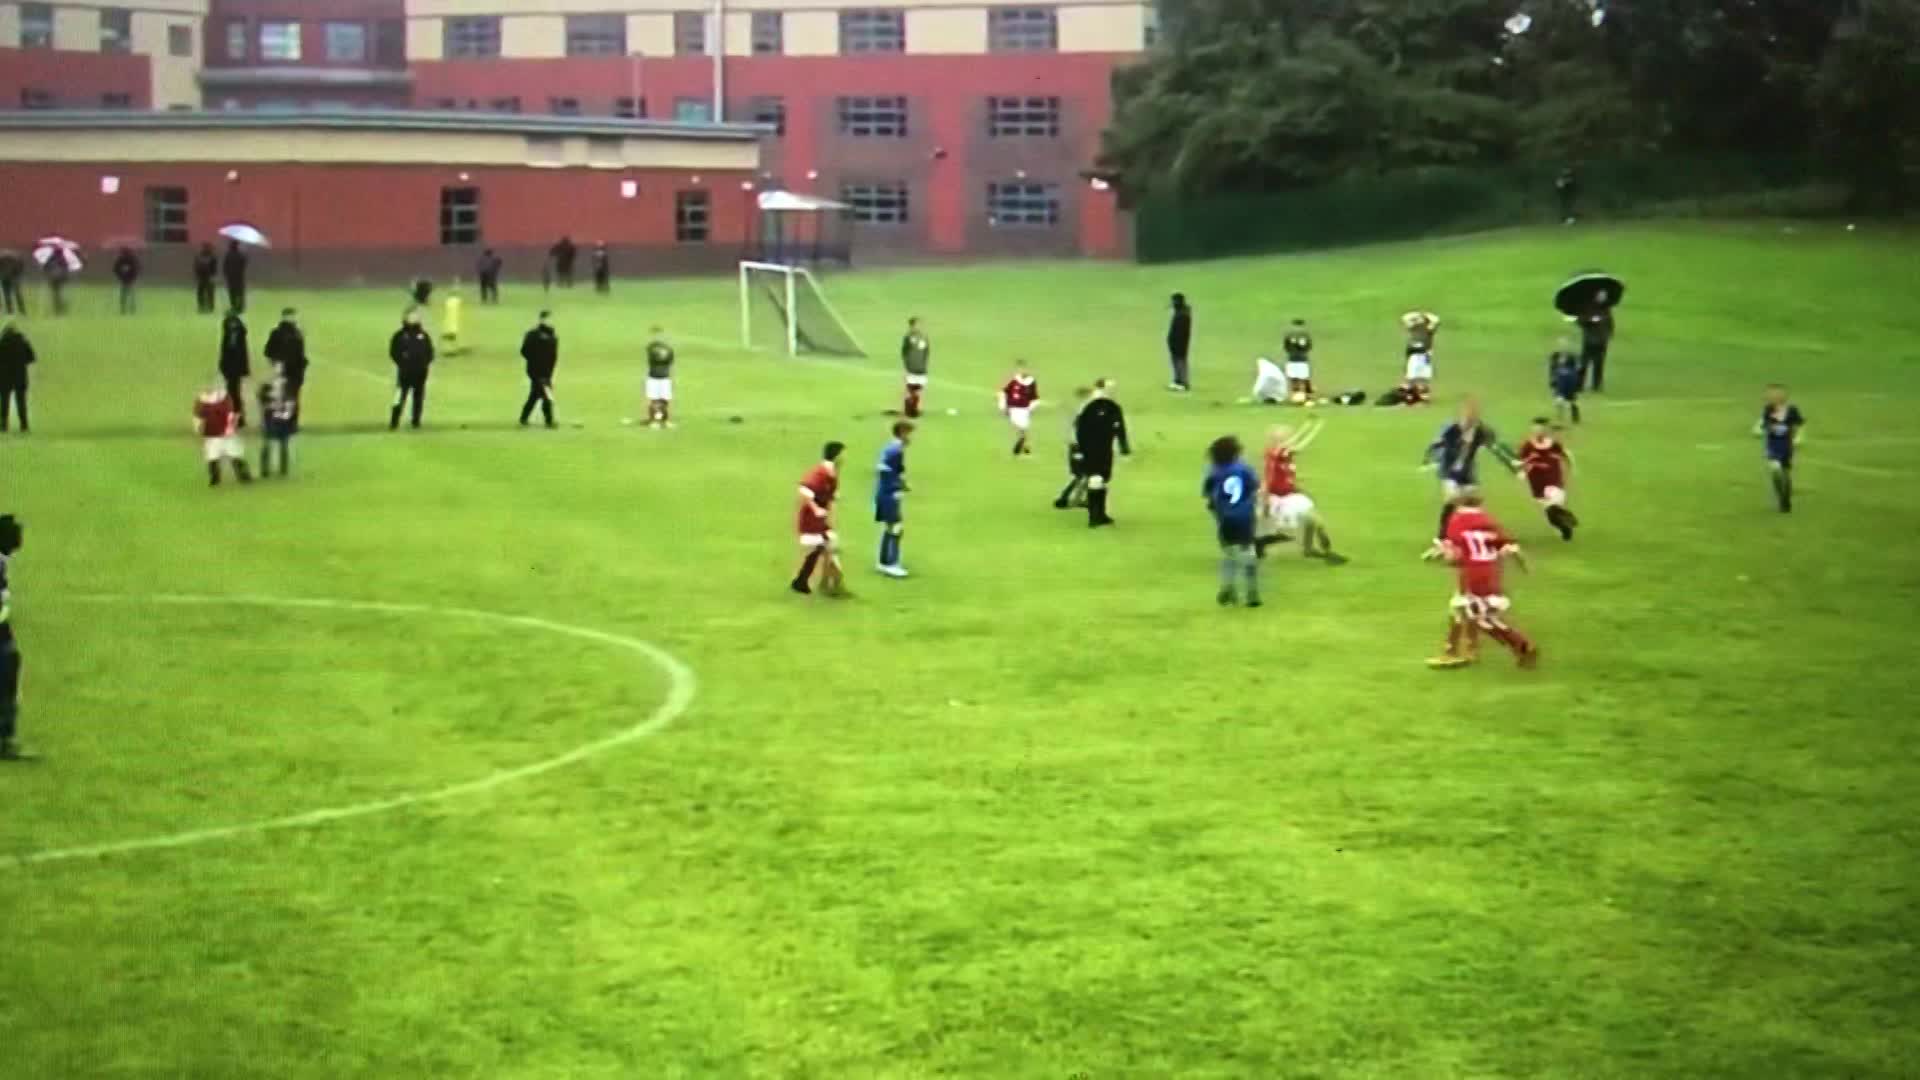 12 Year Old Brandon Wust Scoring against Walsall for Shrewsbury Town from Centre Back